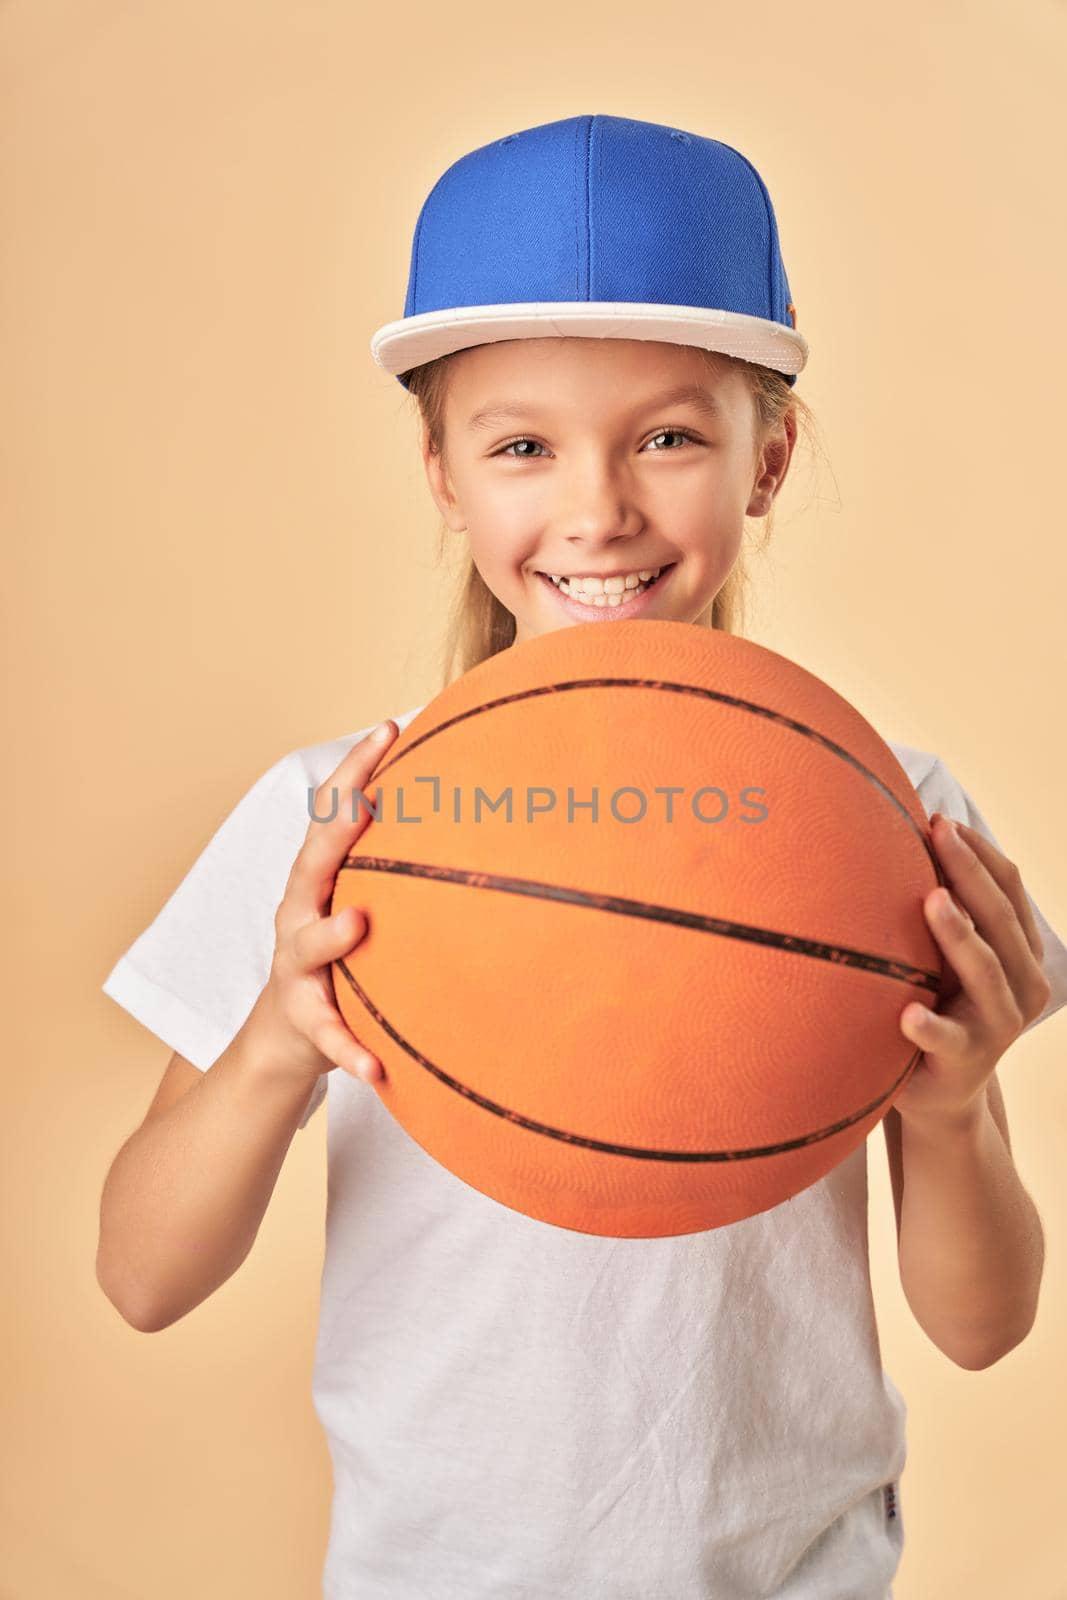 Cute female child basketball player holding game ball and smiling while standing against light orange background